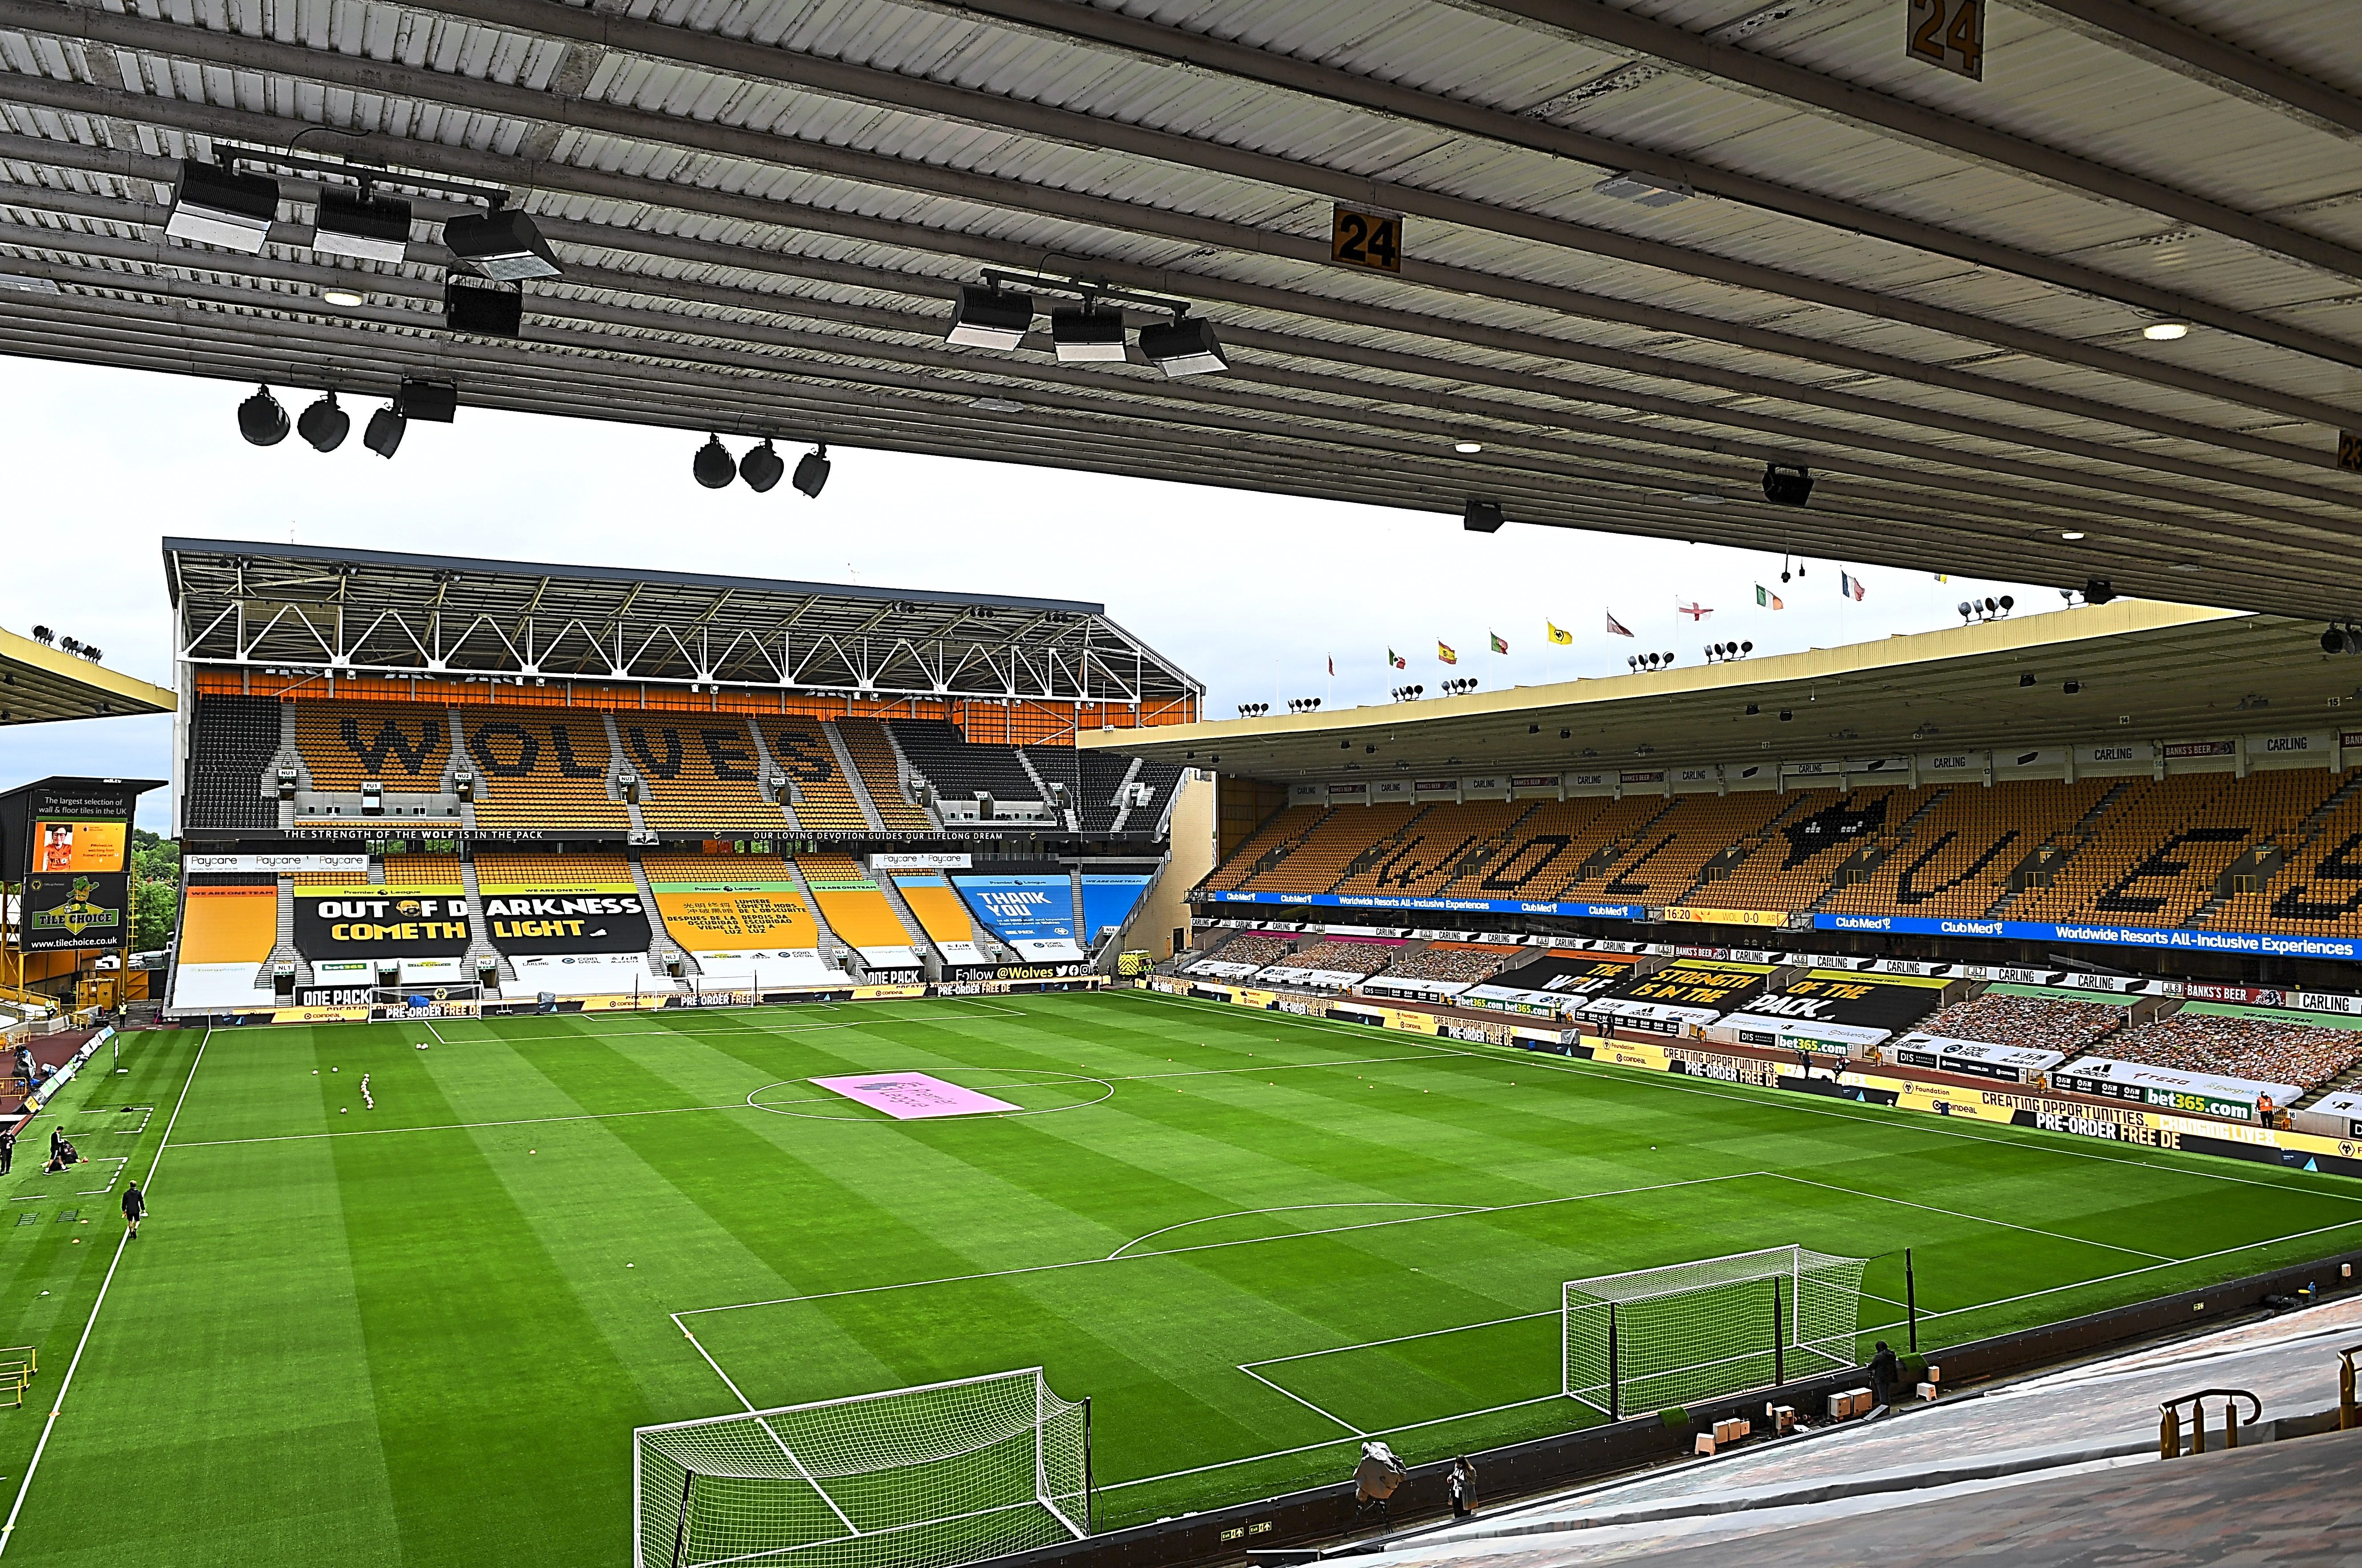 Talks Are Still Ongoing Over Molineux Expansion Plans Shropshire Star